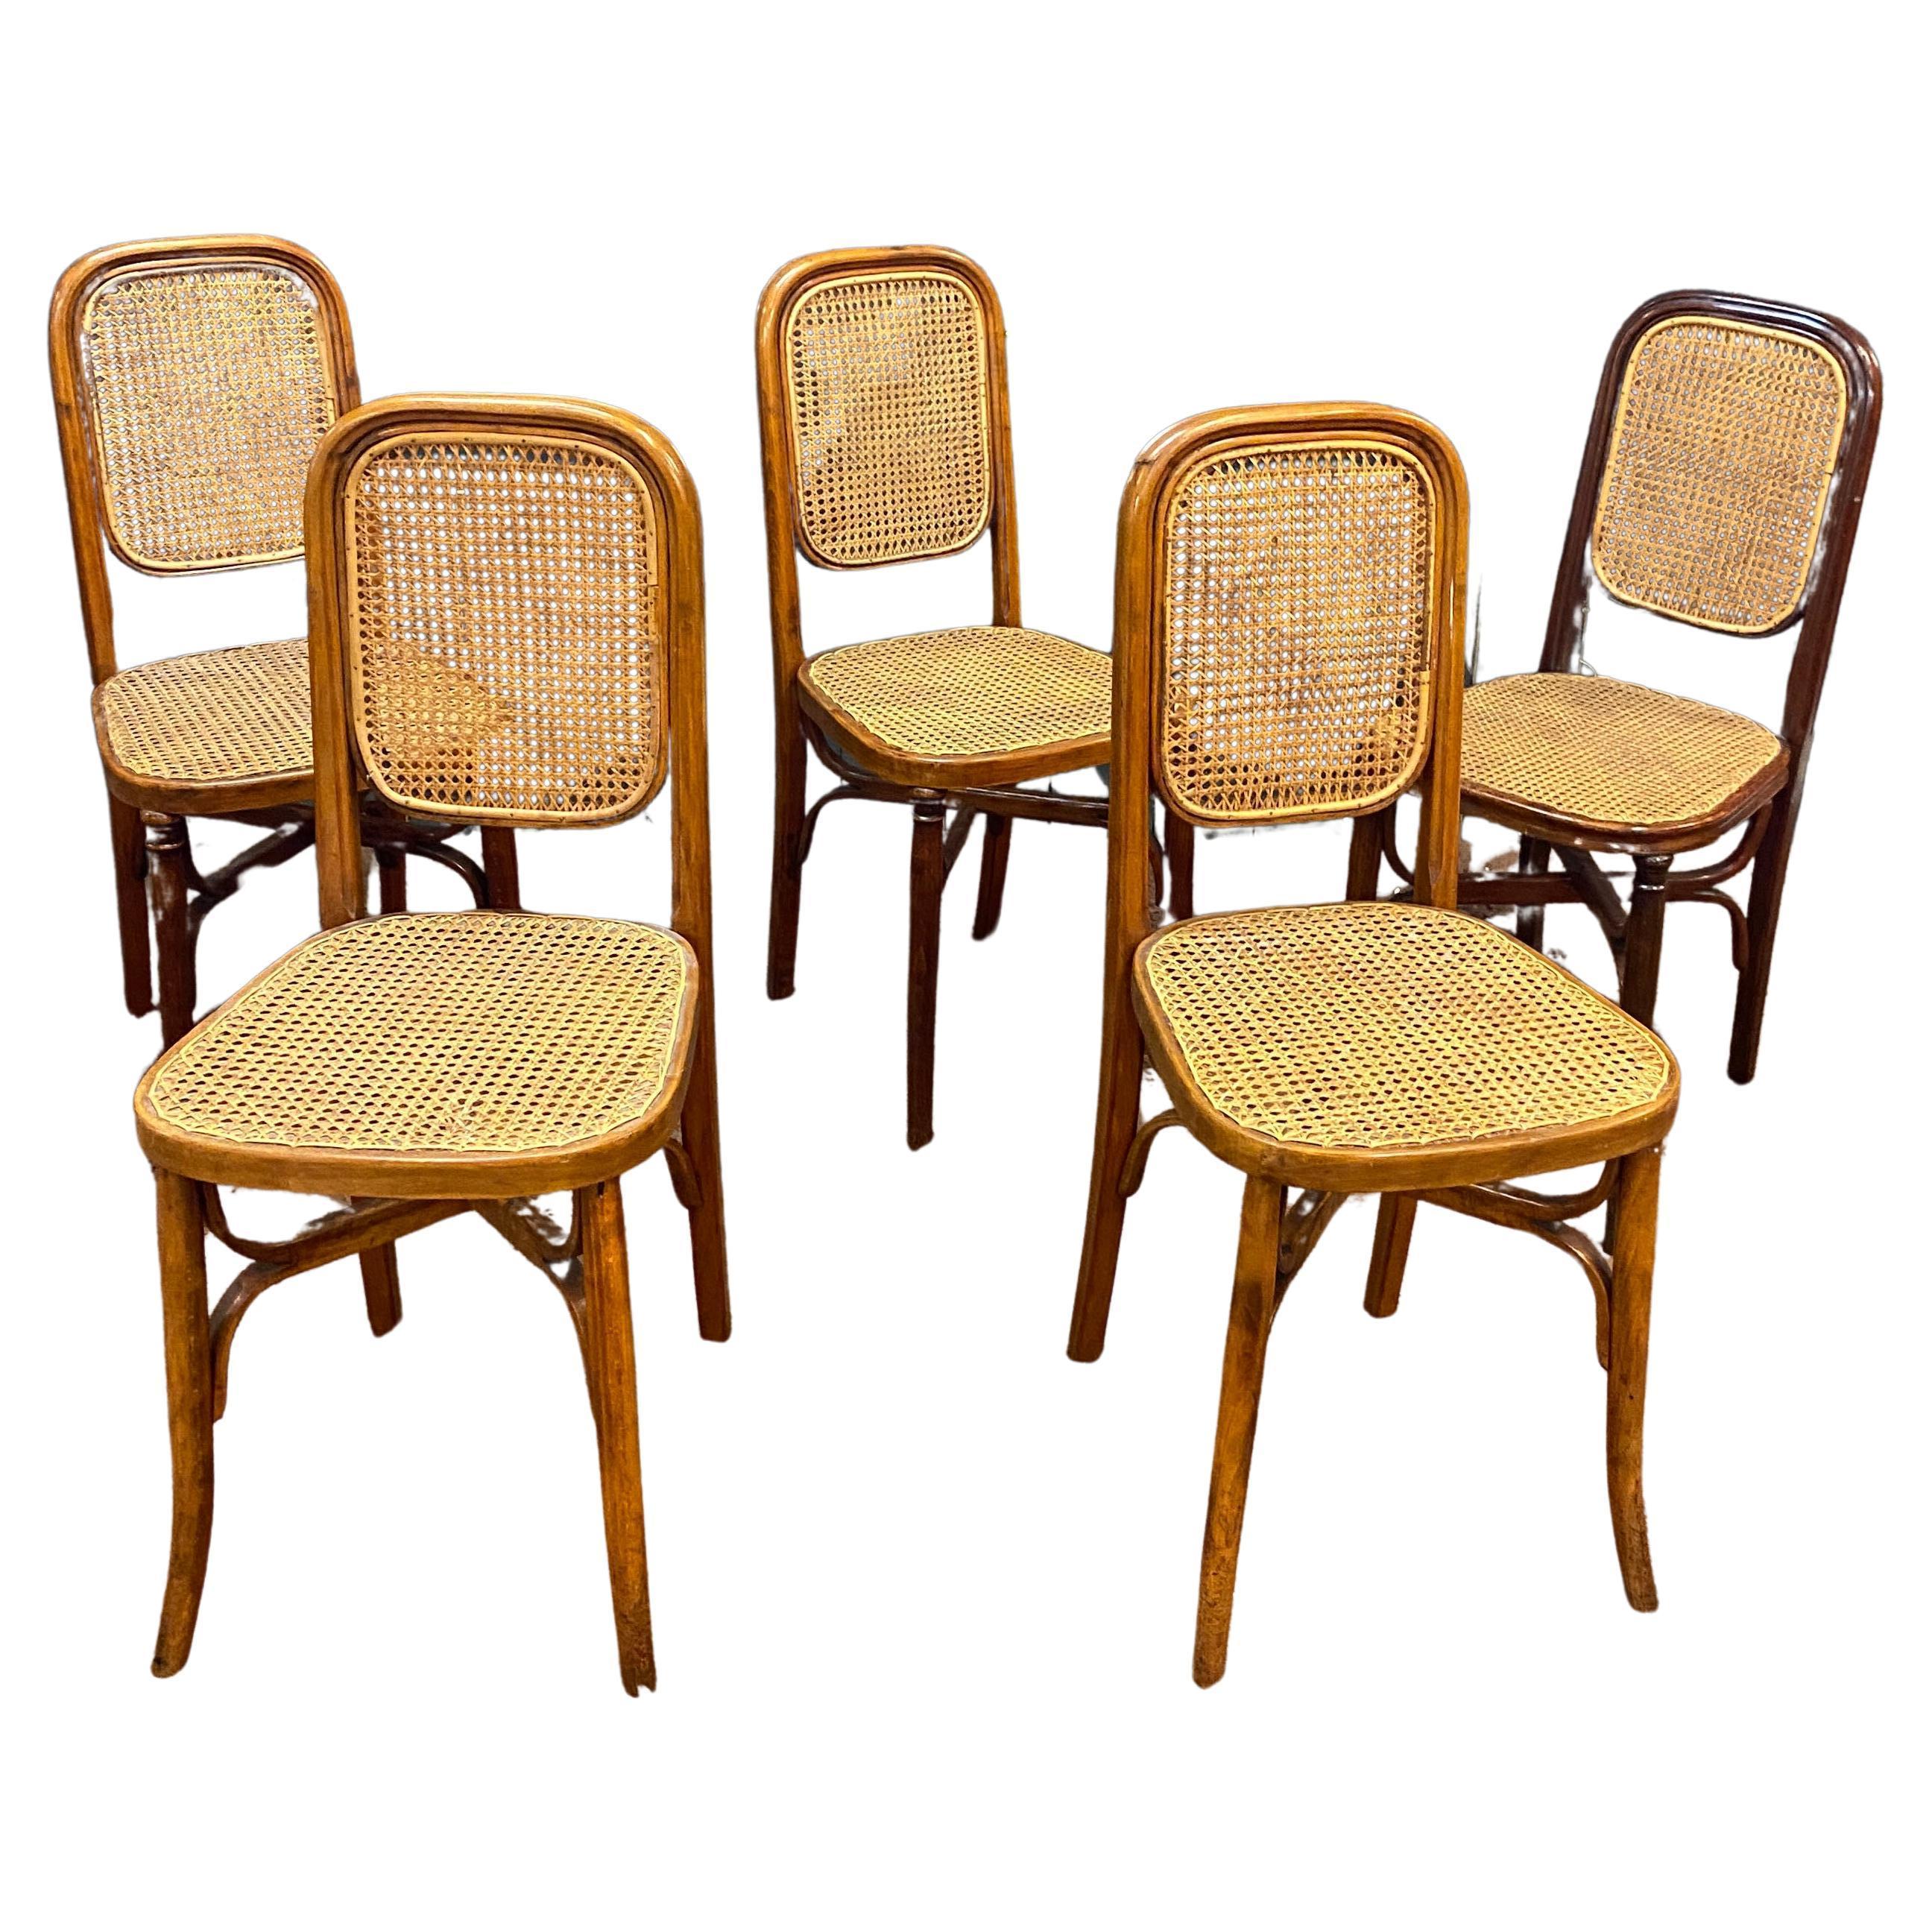 5 Thonet style chairs circa 1900 For Sale